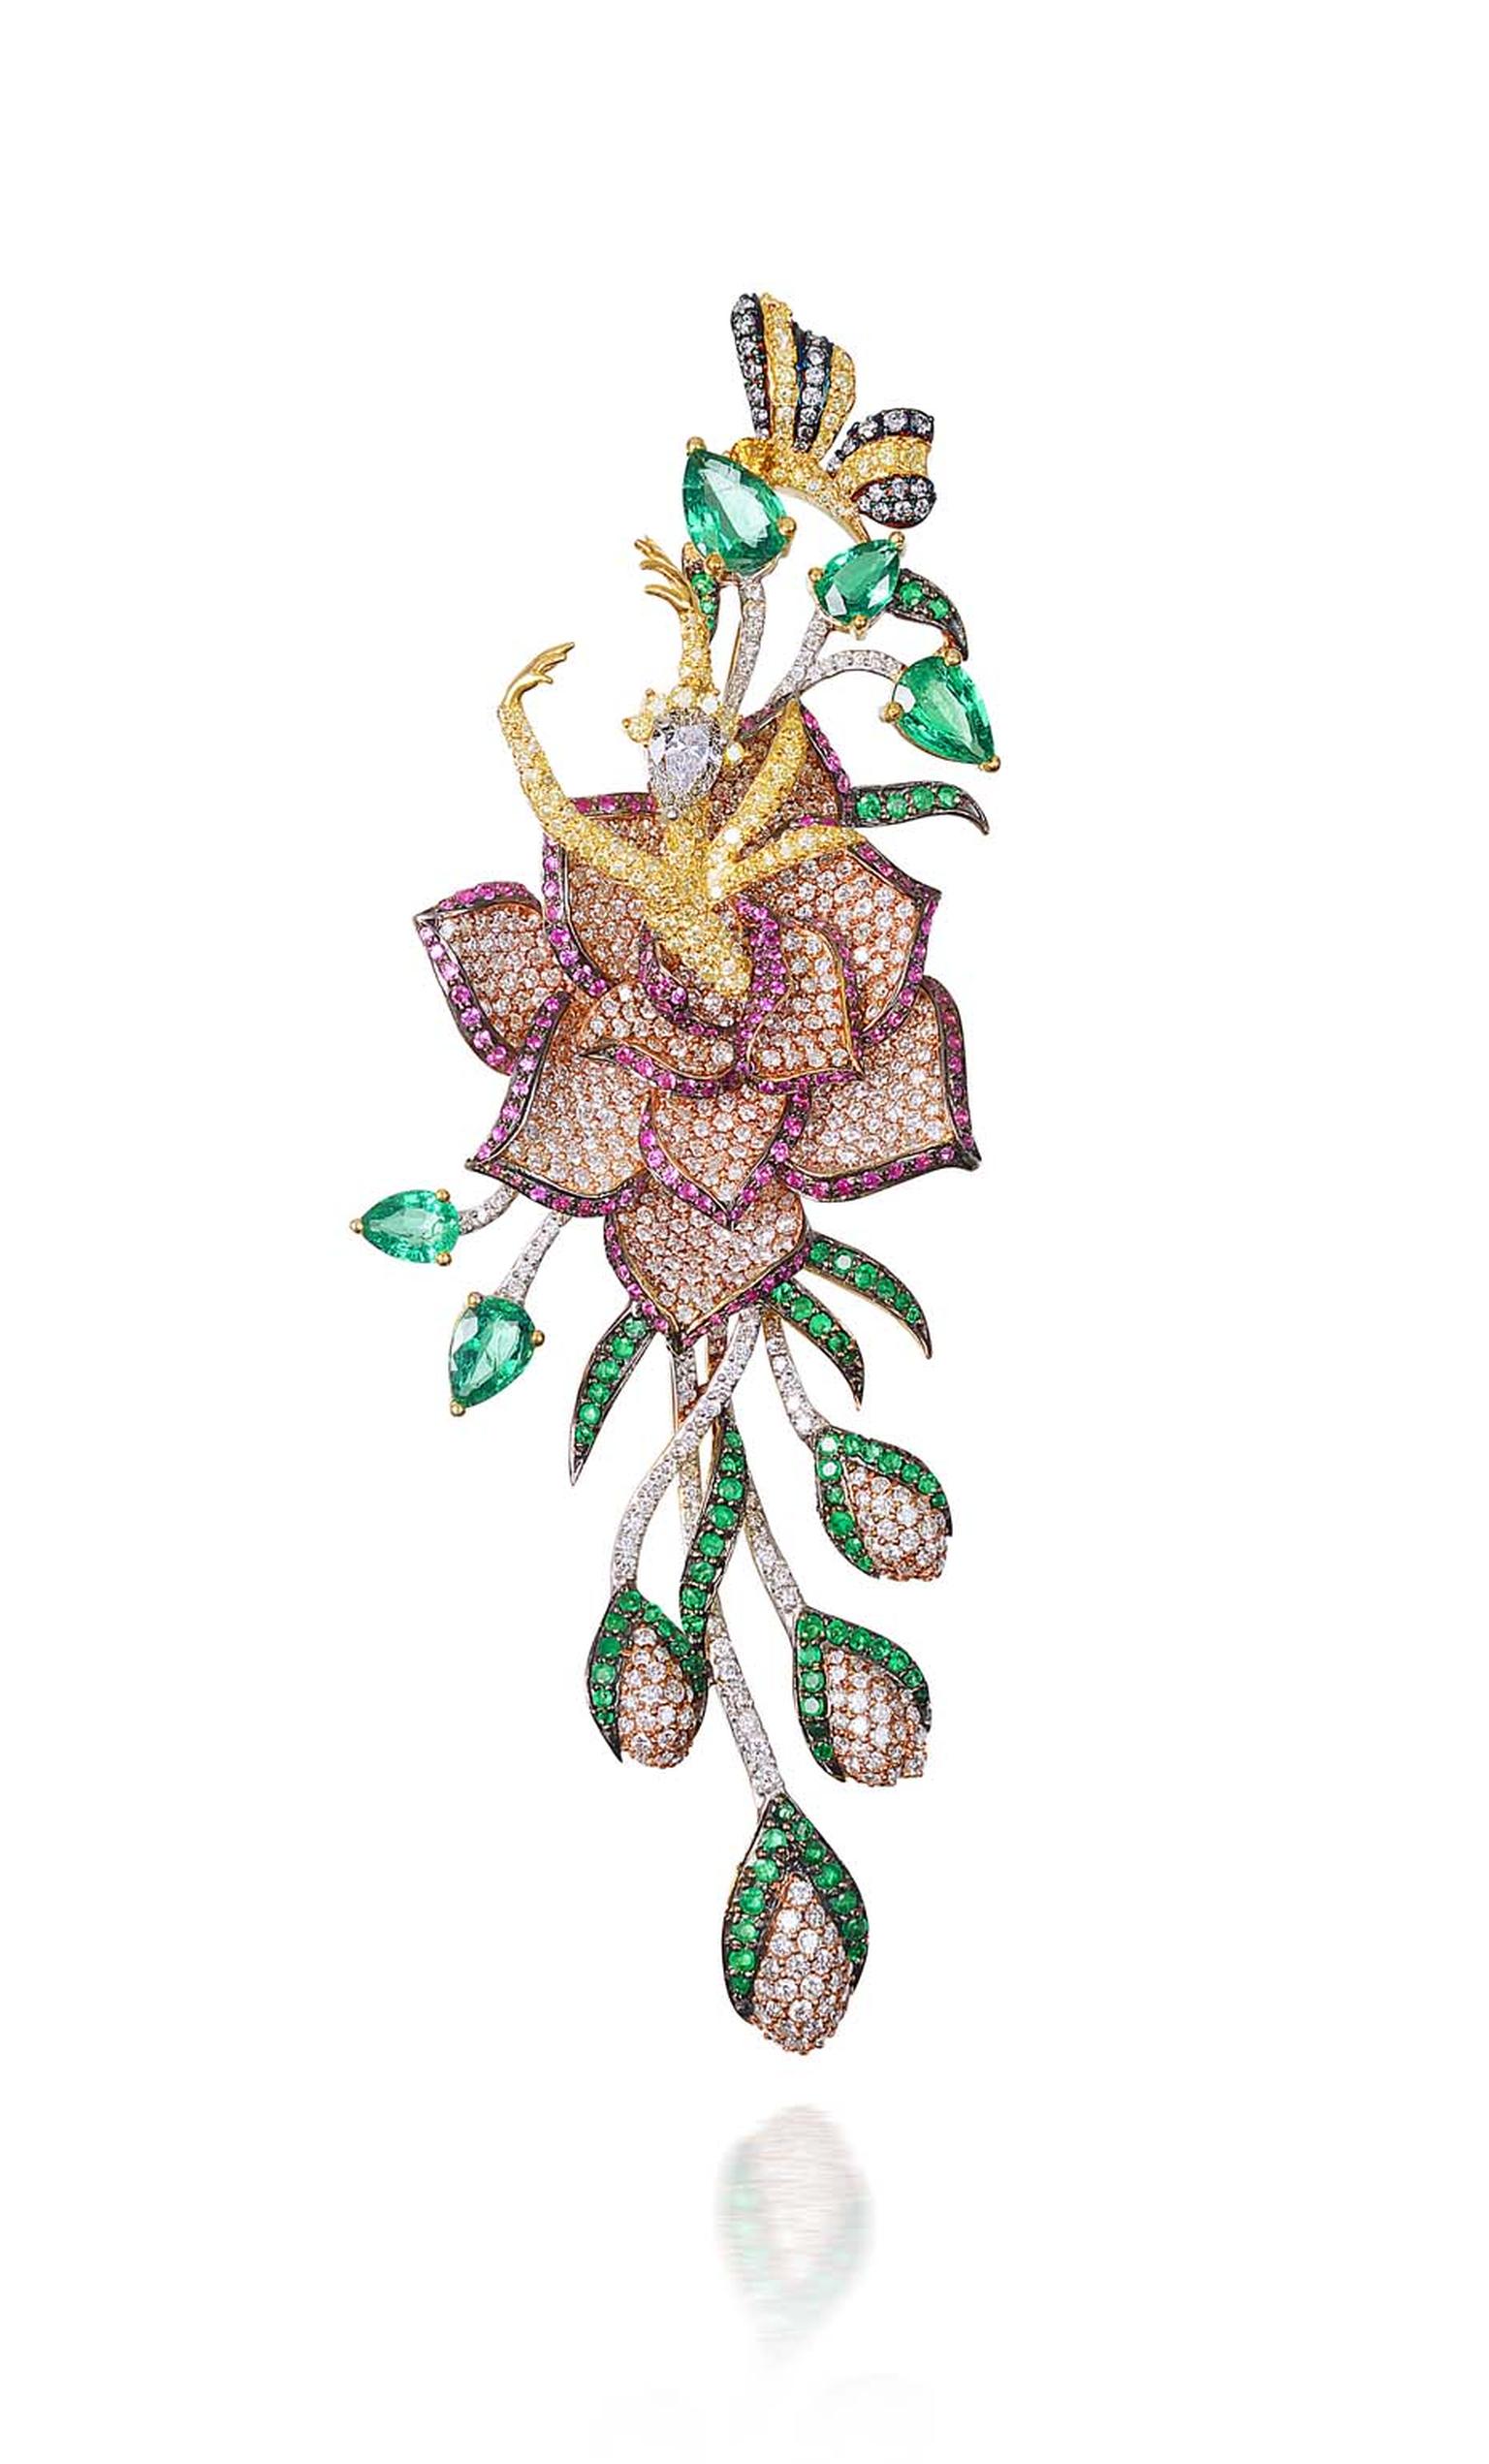 Lot 4, a brooch and hairpiece by Hazoorilal Jewellers, studded with white and yellow diamonds alongside Gemfields emerald and rubies (estimate: INR 2,100,000 - 2,500,000; $35,000 - 42,000)